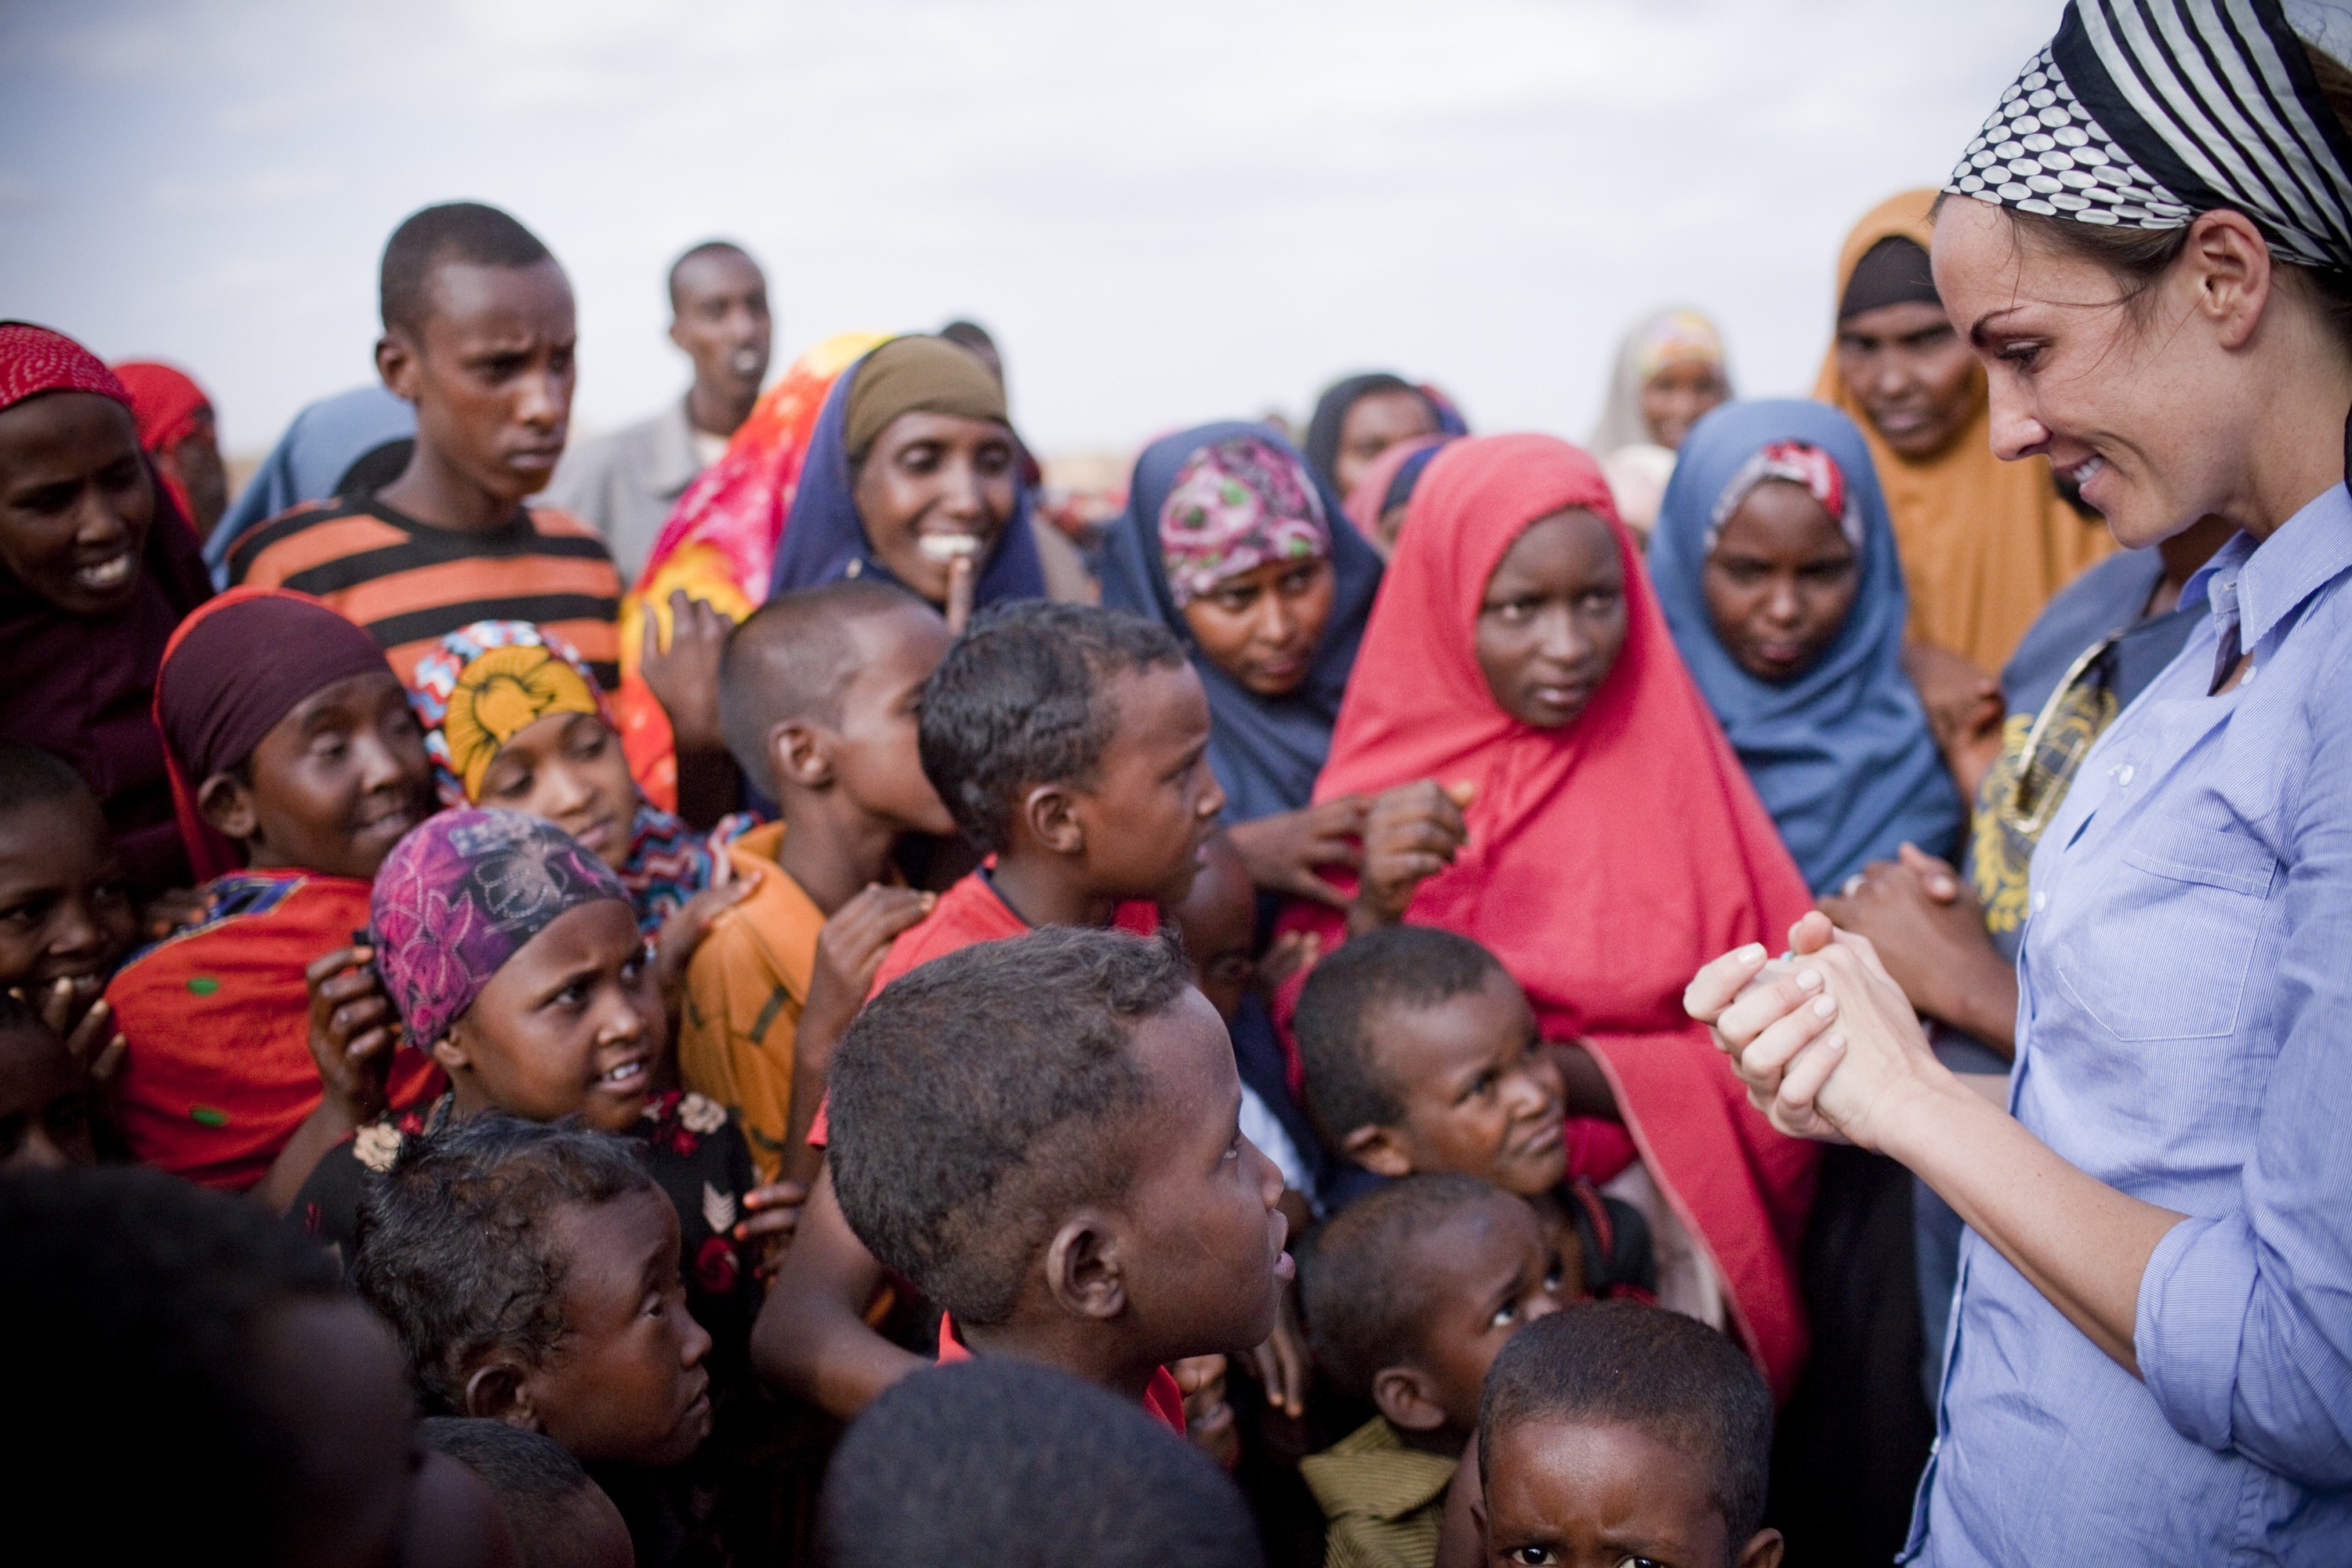 REACHING OUT- Amanda Lindhout talks with children during a recent trip to Africa. She continues her work to raise support for those in danger of starvation.